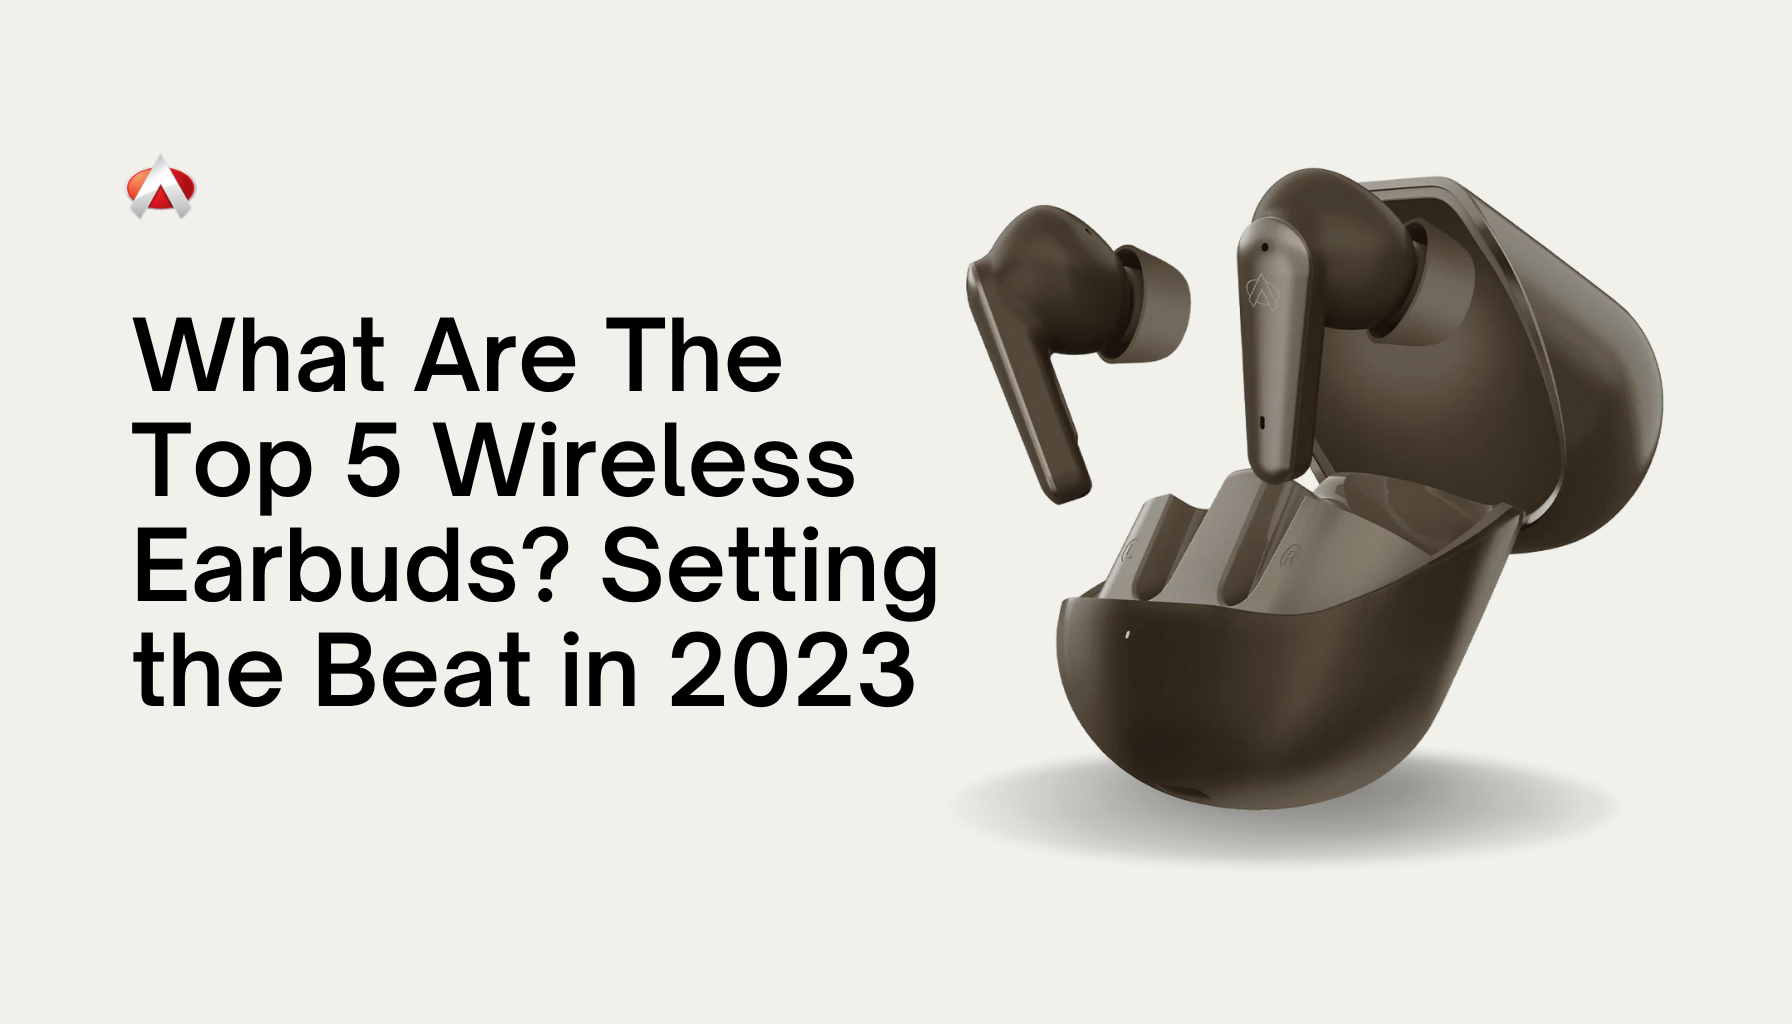 What Are The Top 5 Wireless Earbuds? Setting the Beat in 2023